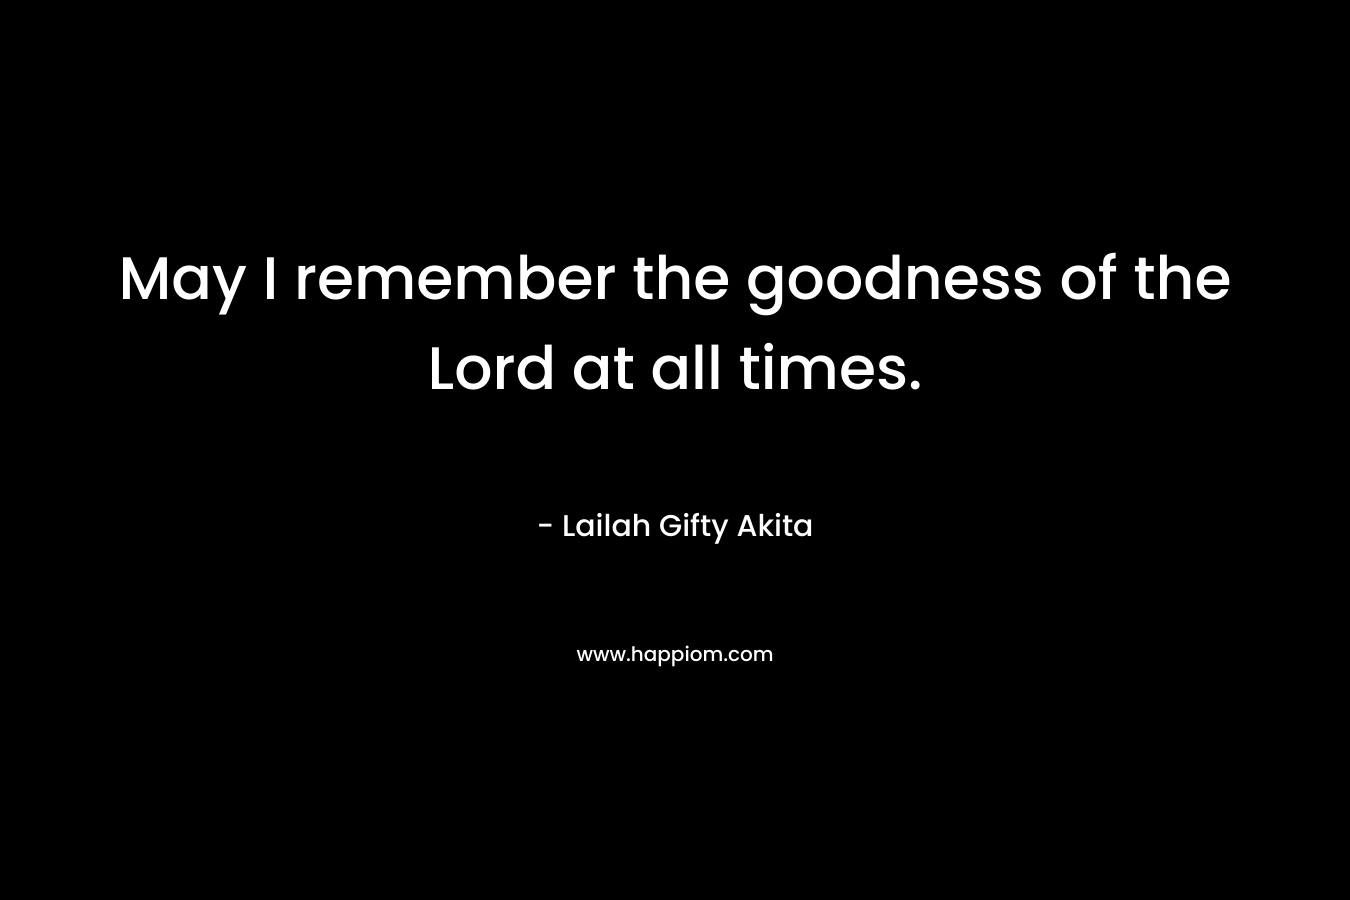 May I remember the goodness of the Lord at all times.